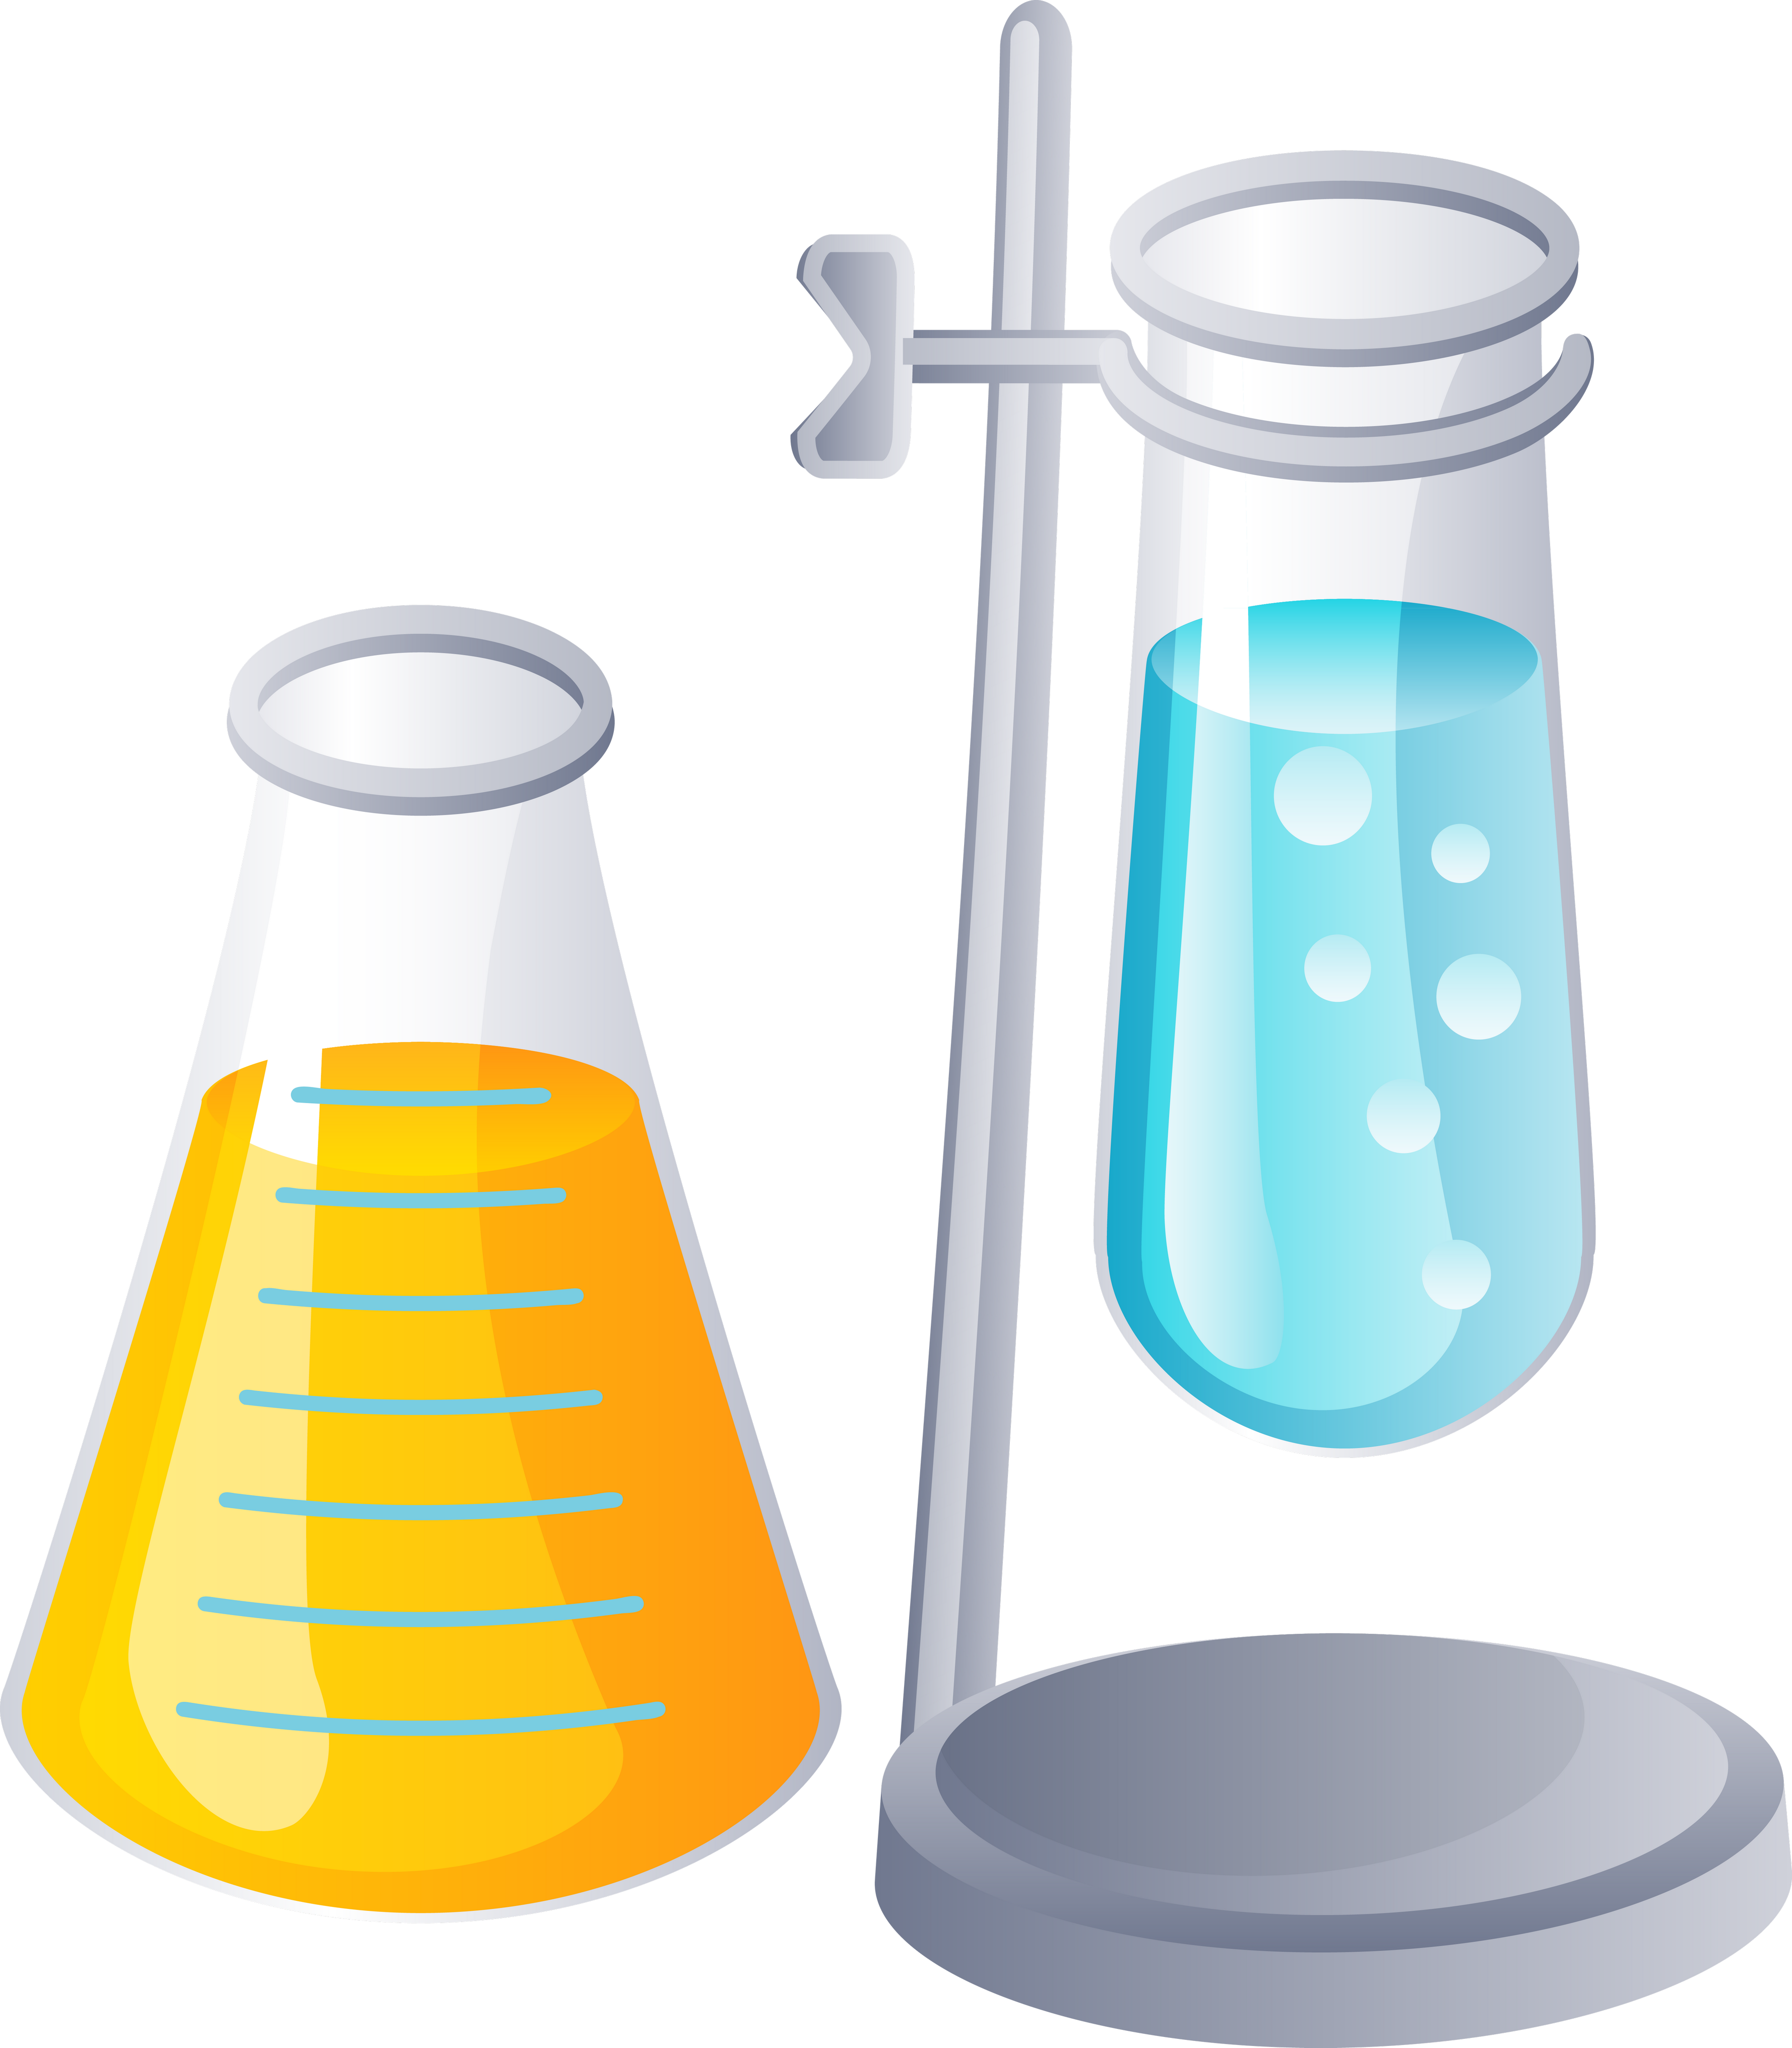 Science tools clipart - 🧡 Clip Art Science Equipment - Png Download - Ful....